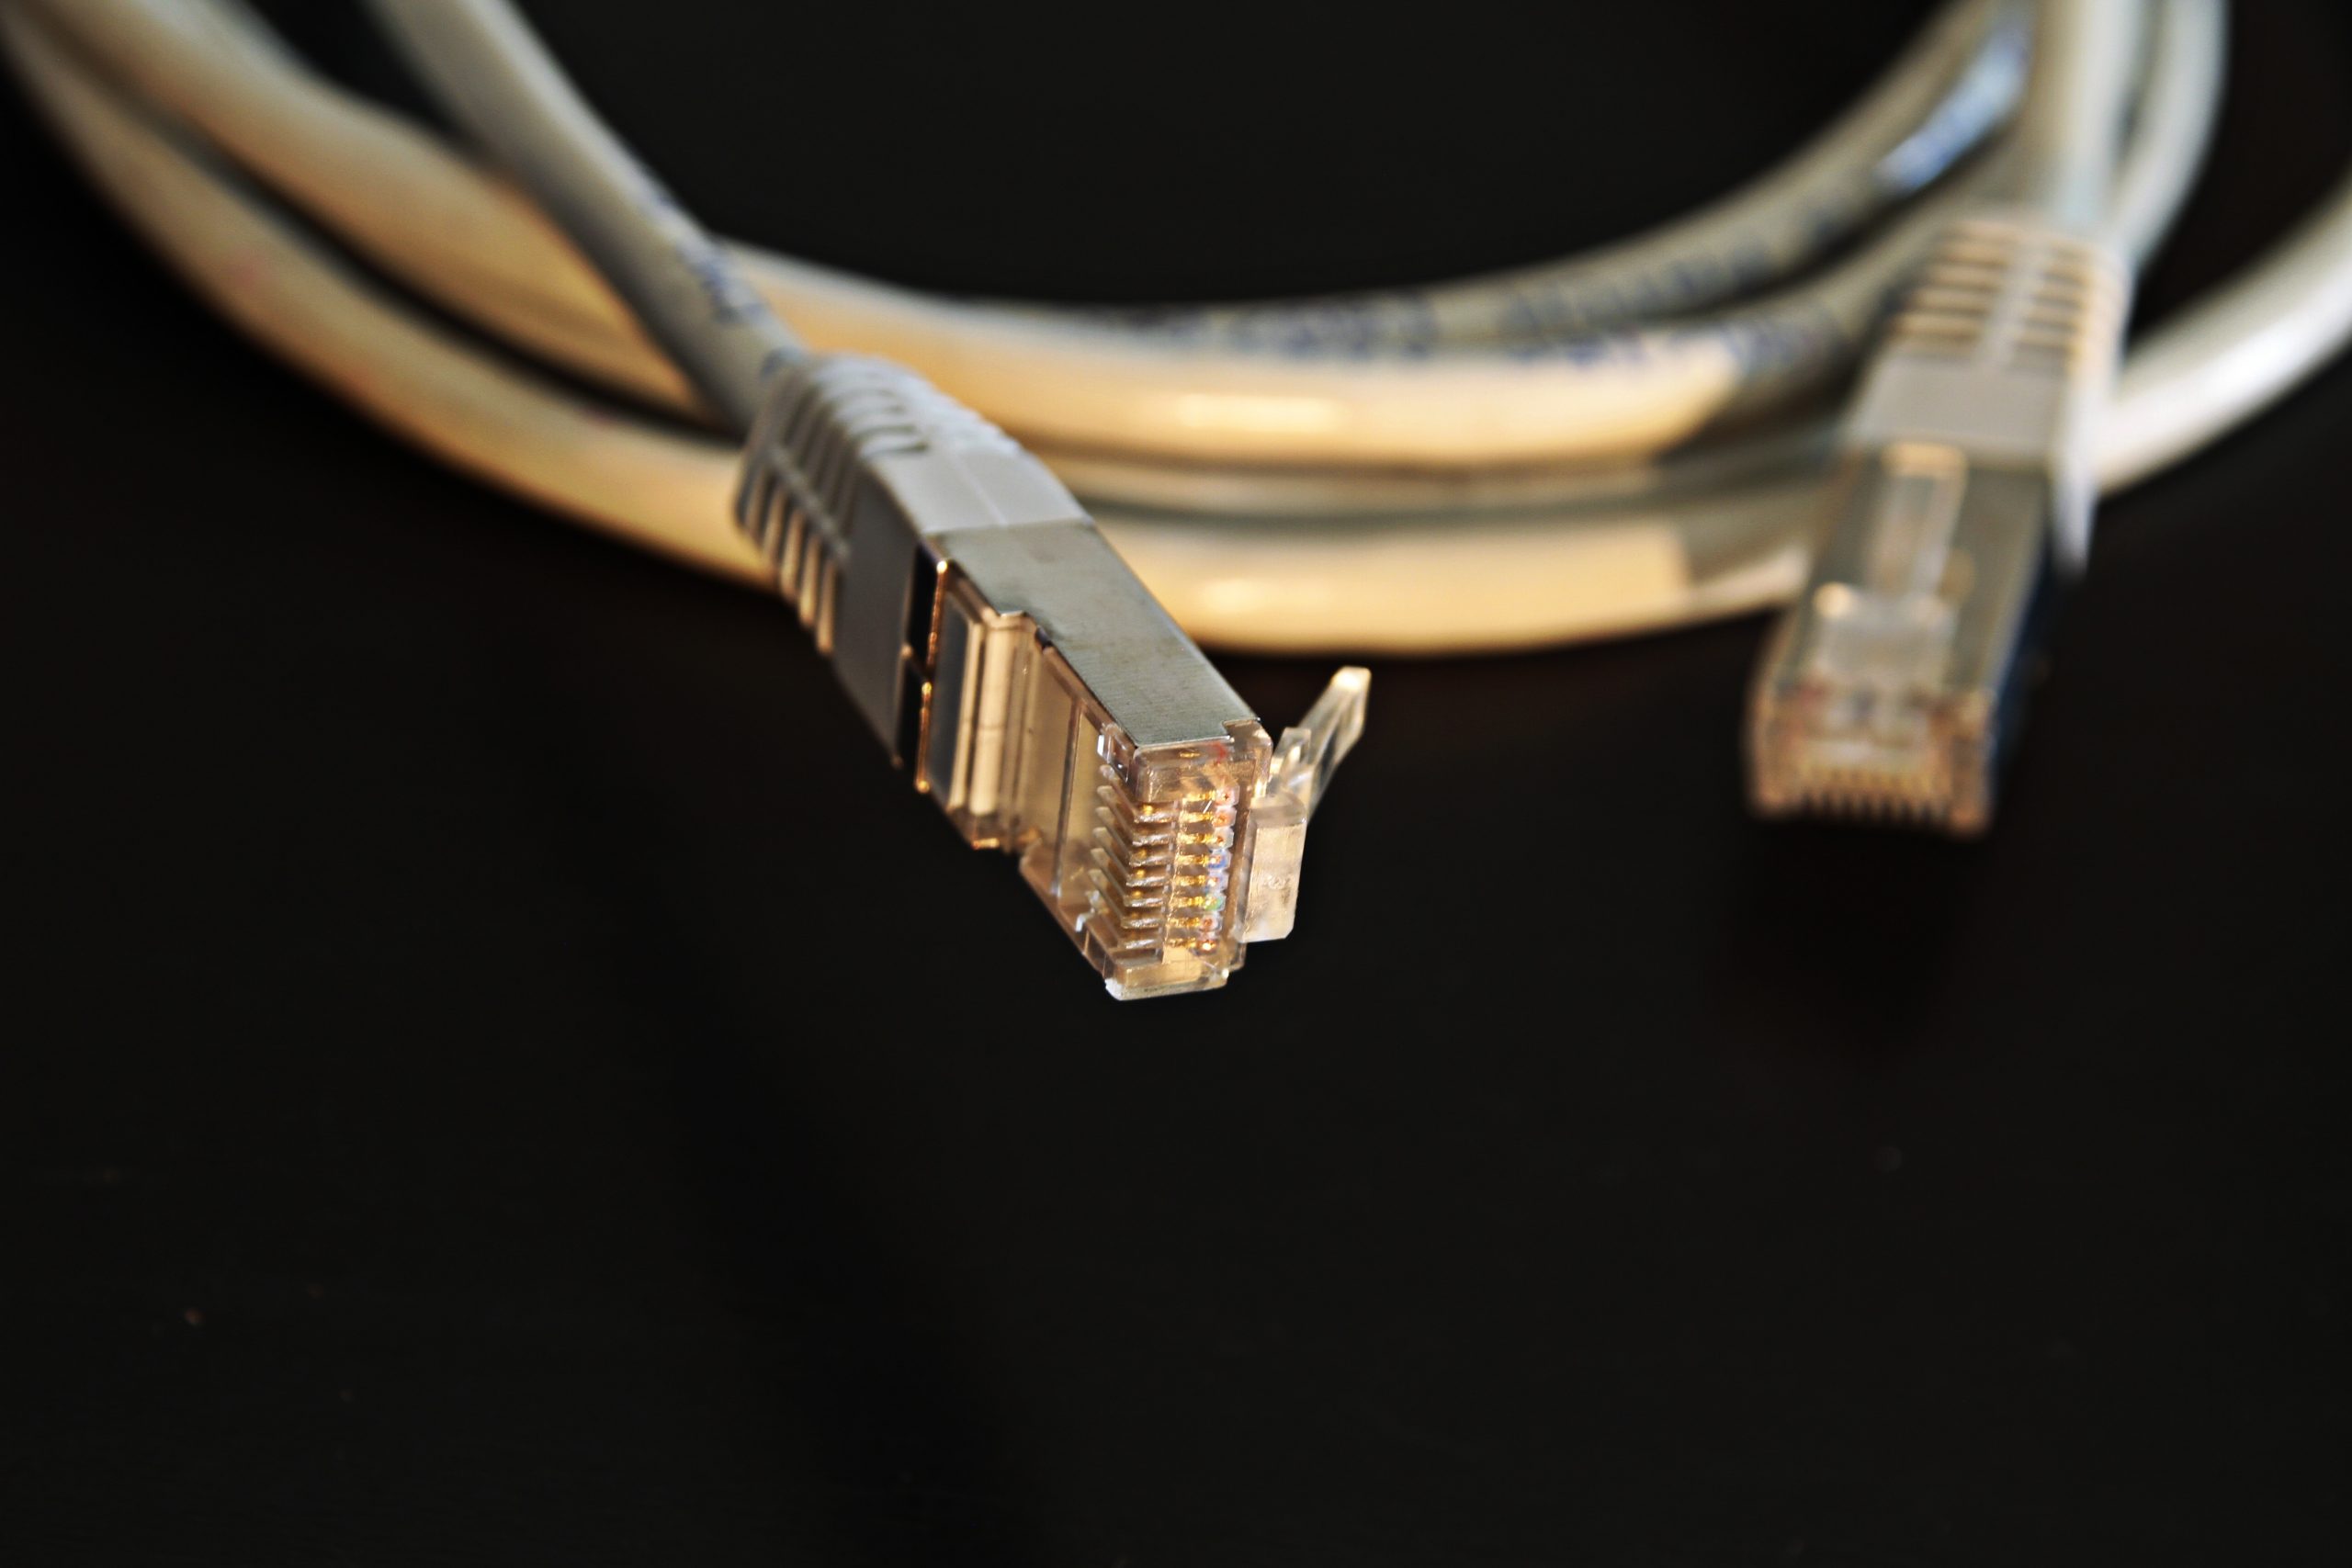 Ethernet Cabling Advancements in the last 30 Years